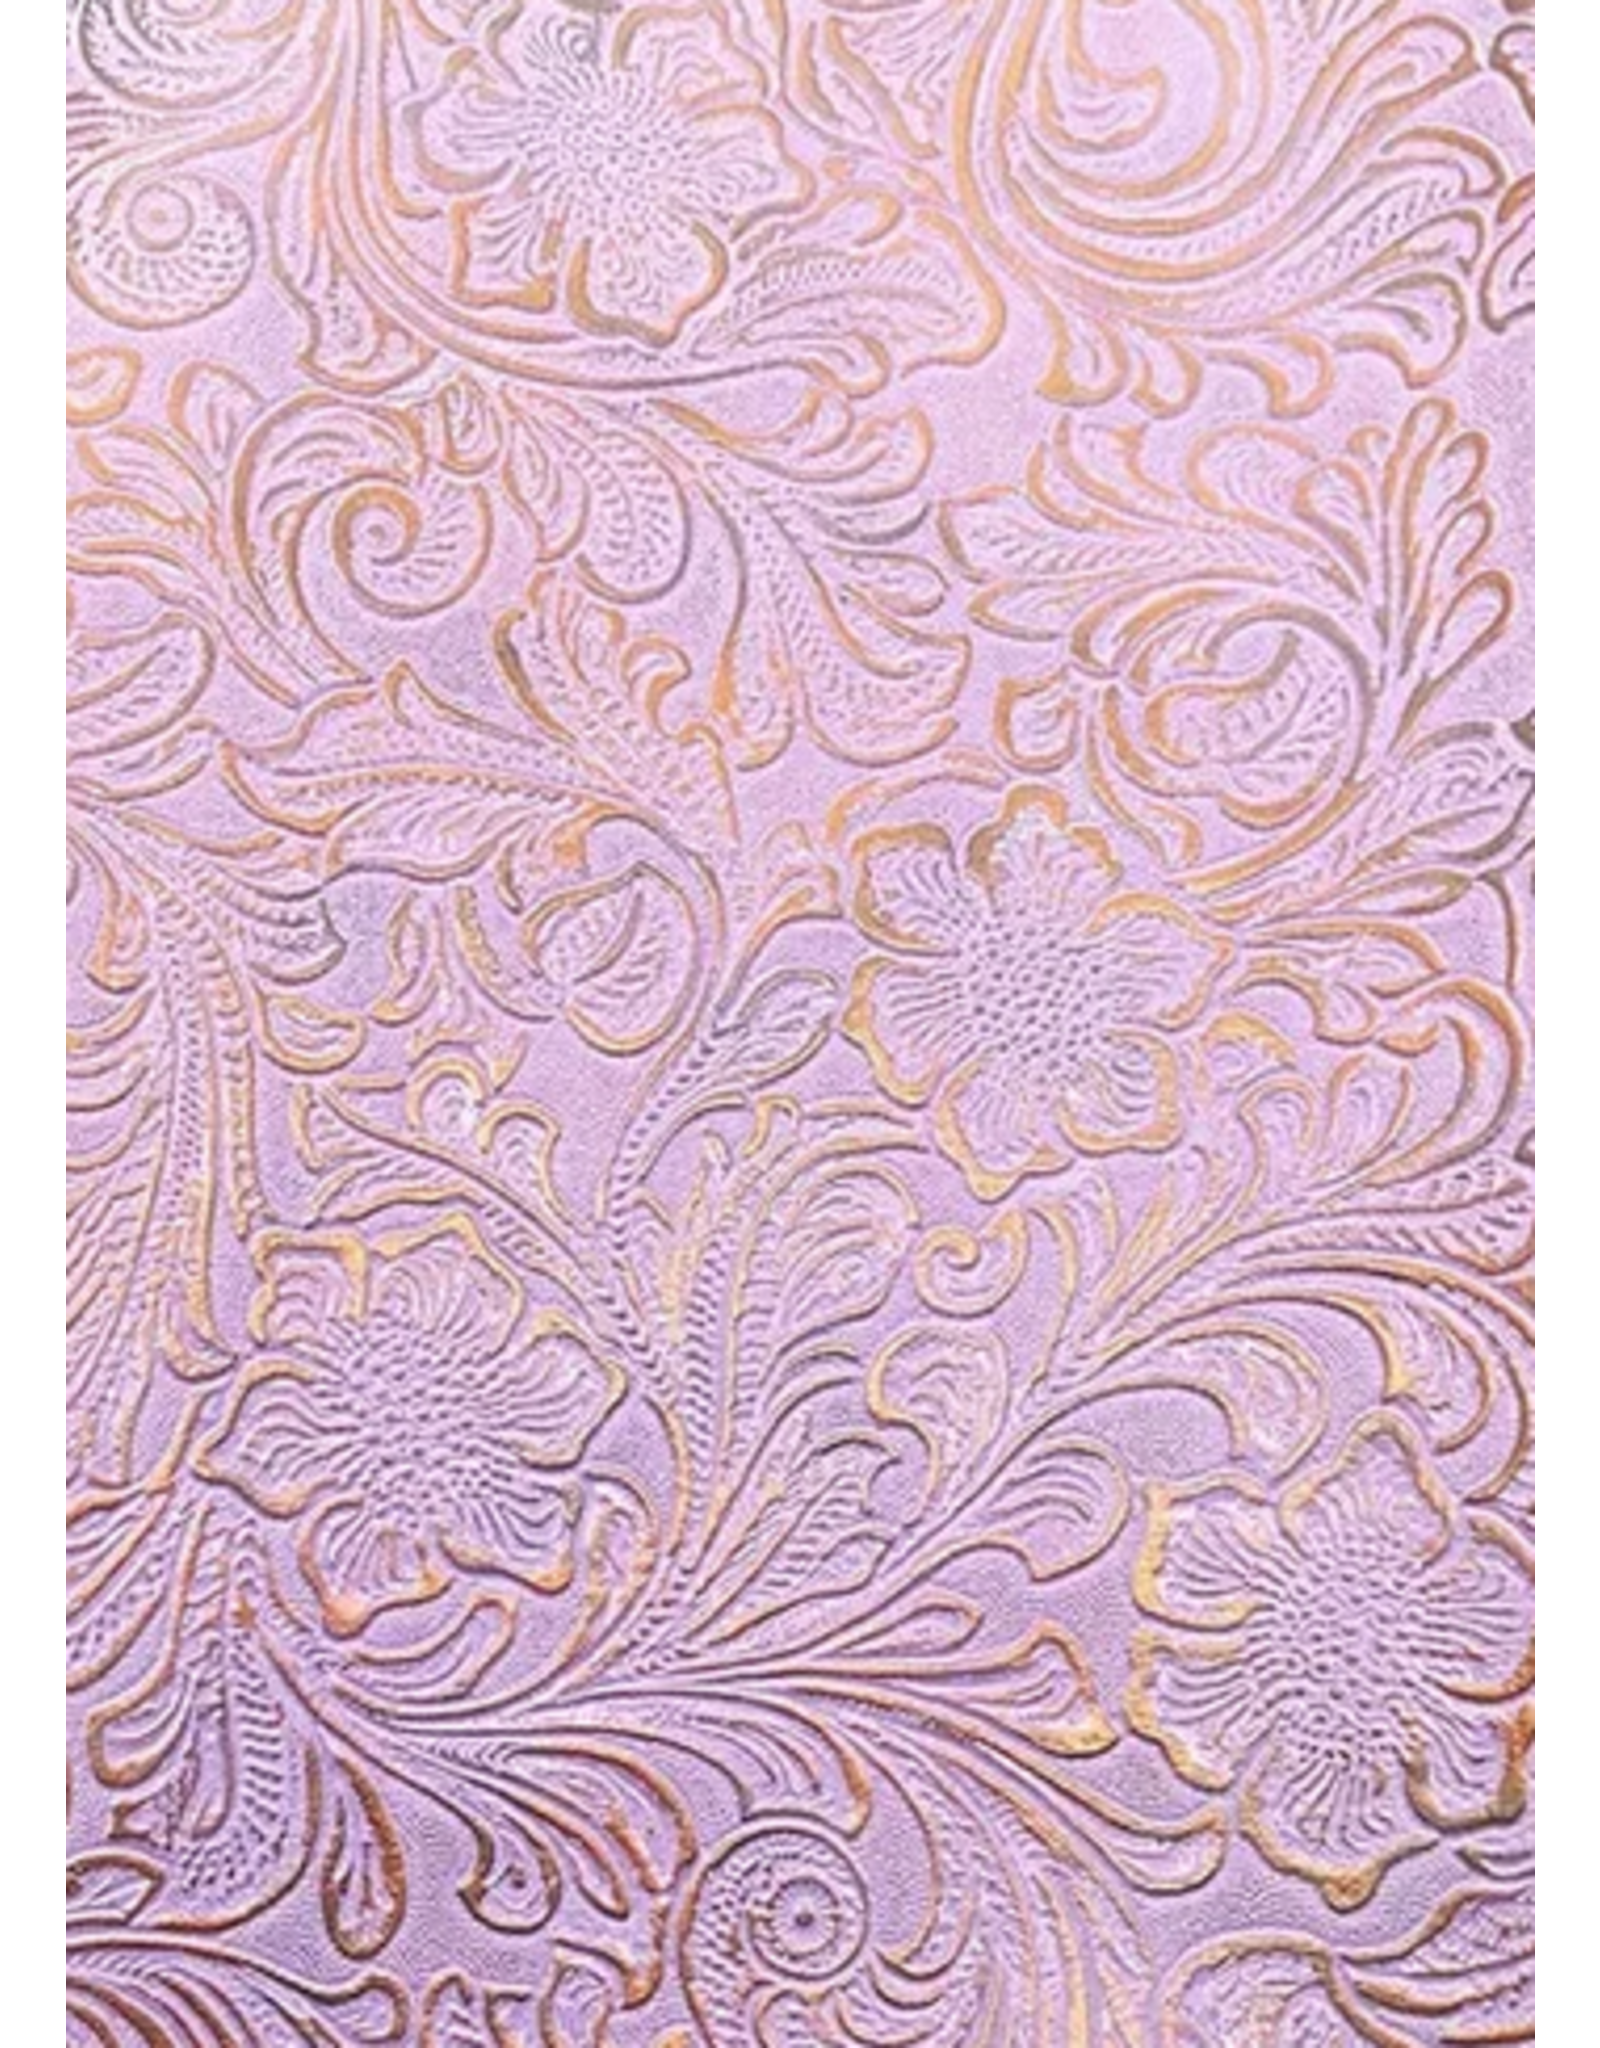 Faux Leather Beading Backing Lavender Bronze Floral   .8mm thick 8x11"